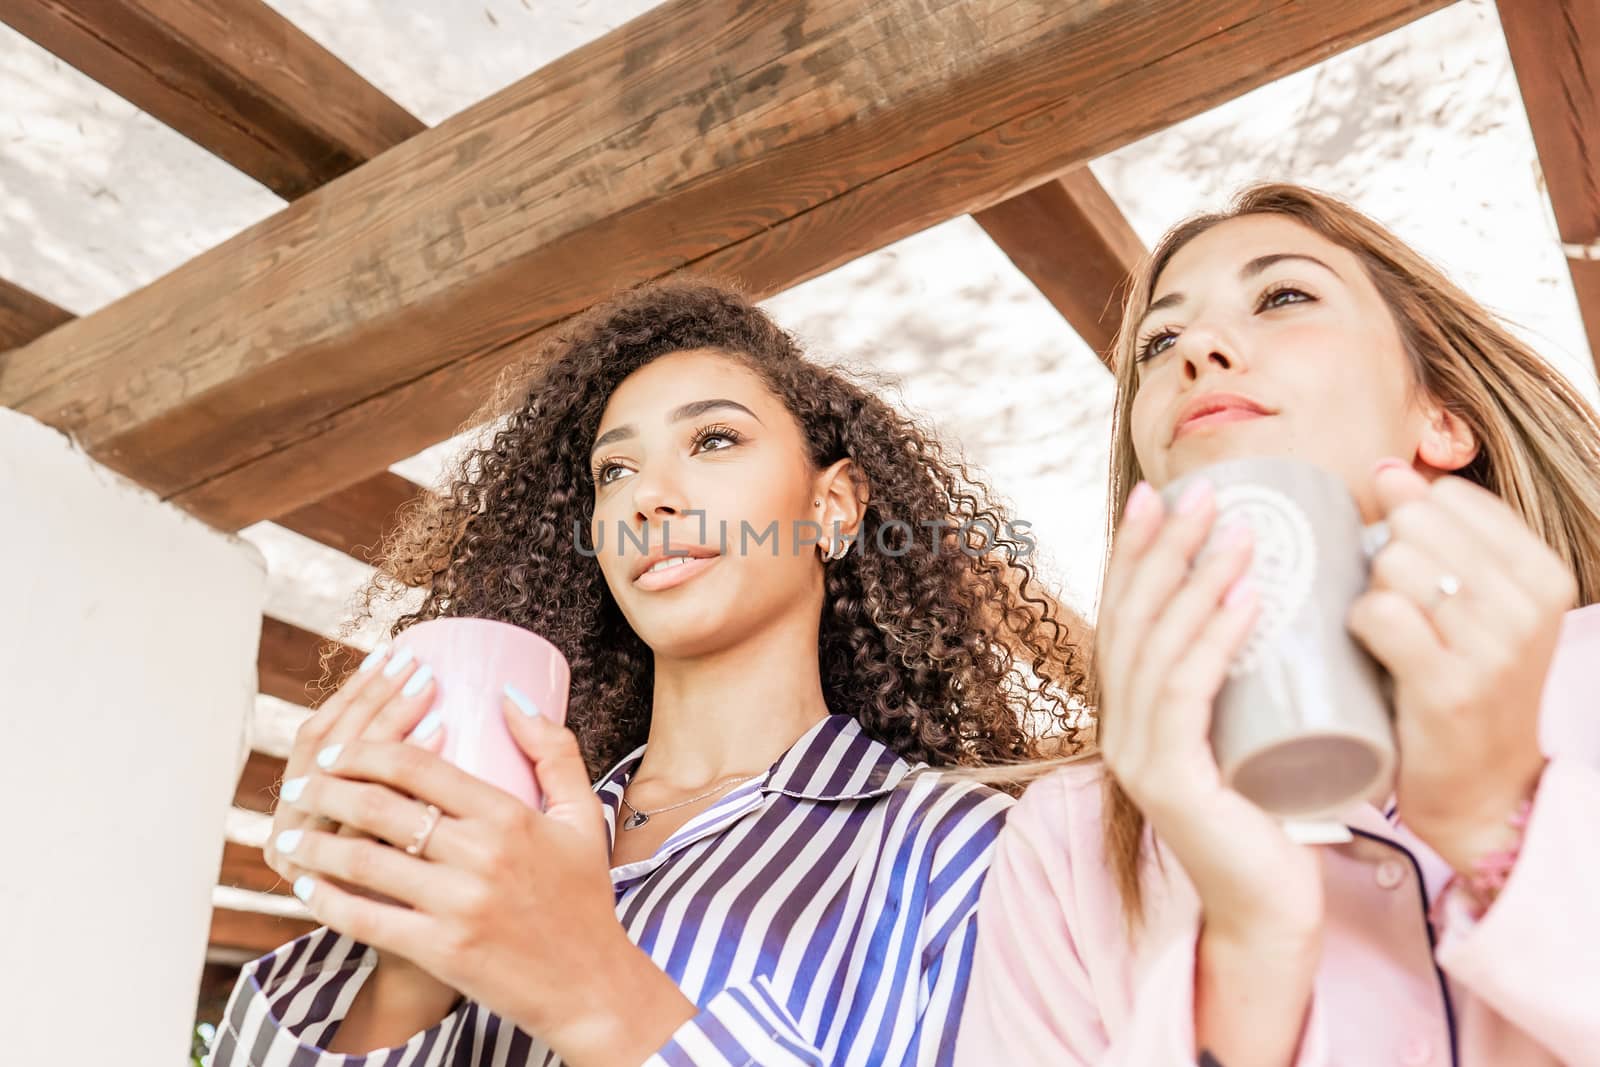 Beauty and diversity: mixed race couple in pajama view from bottom holding tea mug in hand - Caucasian woman and her Hispanic girlfriend just woke up looking toward horizon - Focus on brunette on left by robbyfontanesi